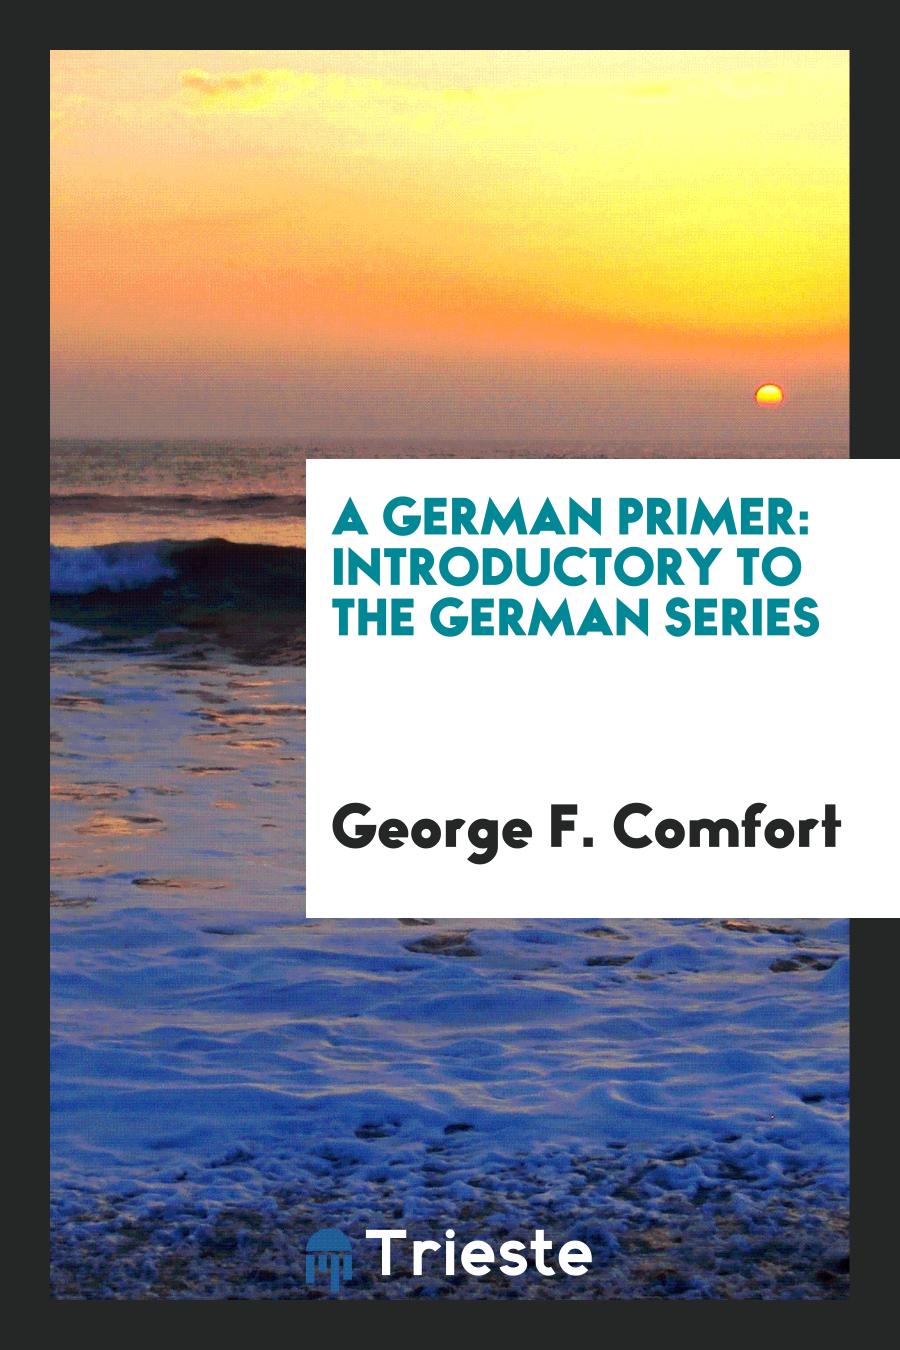 A German Primer: Introductory to the German Series